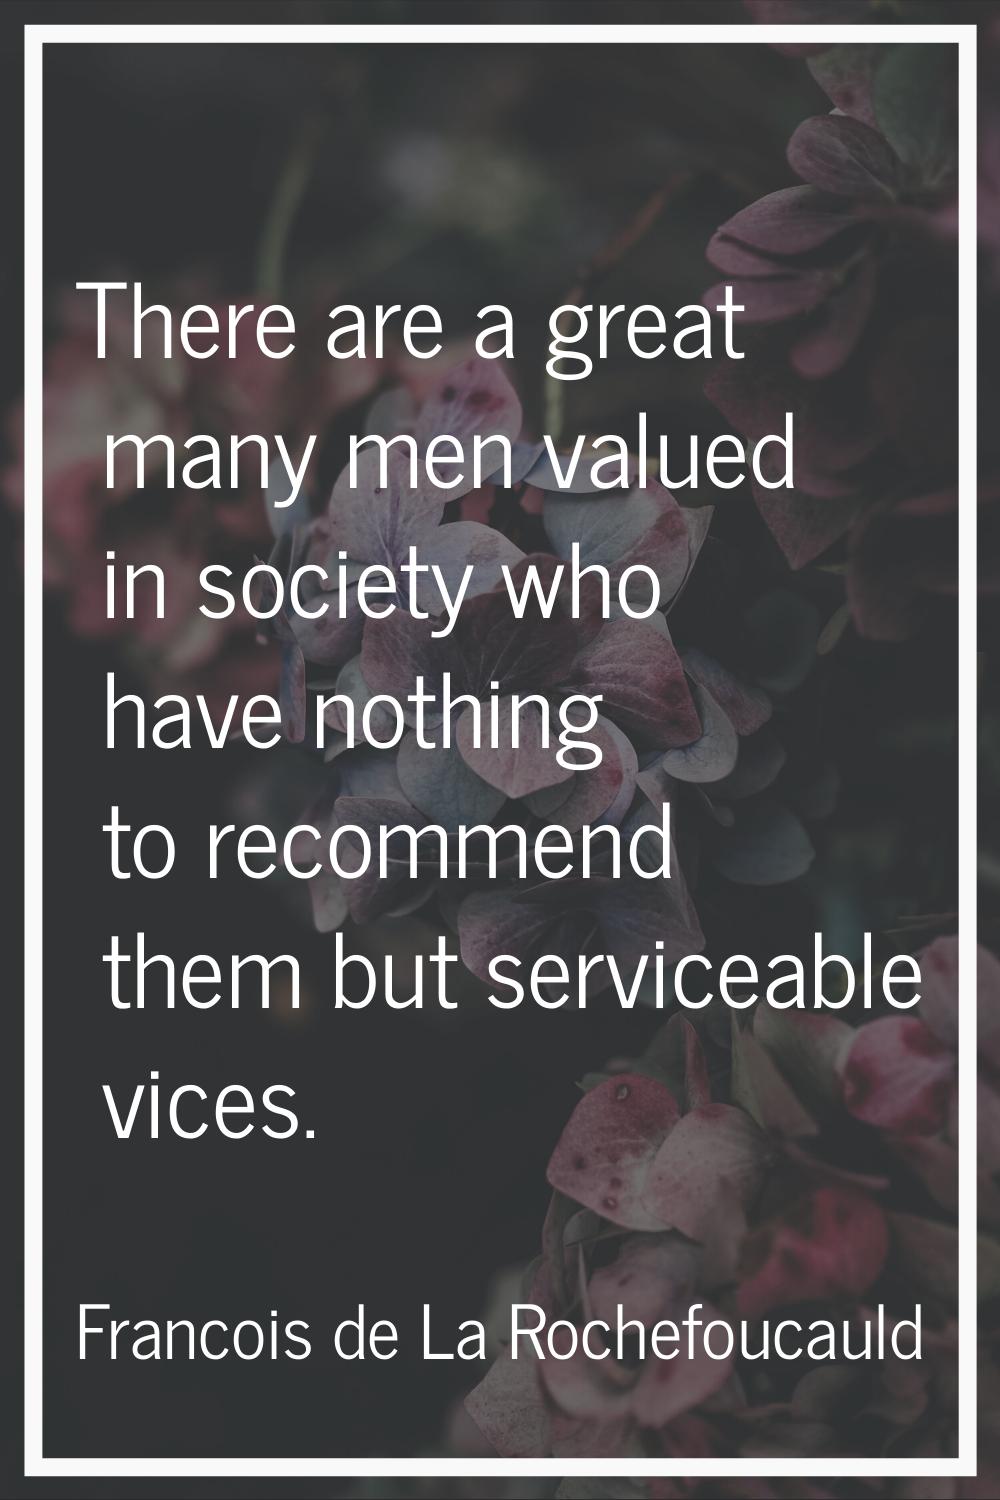 There are a great many men valued in society who have nothing to recommend them but serviceable vic